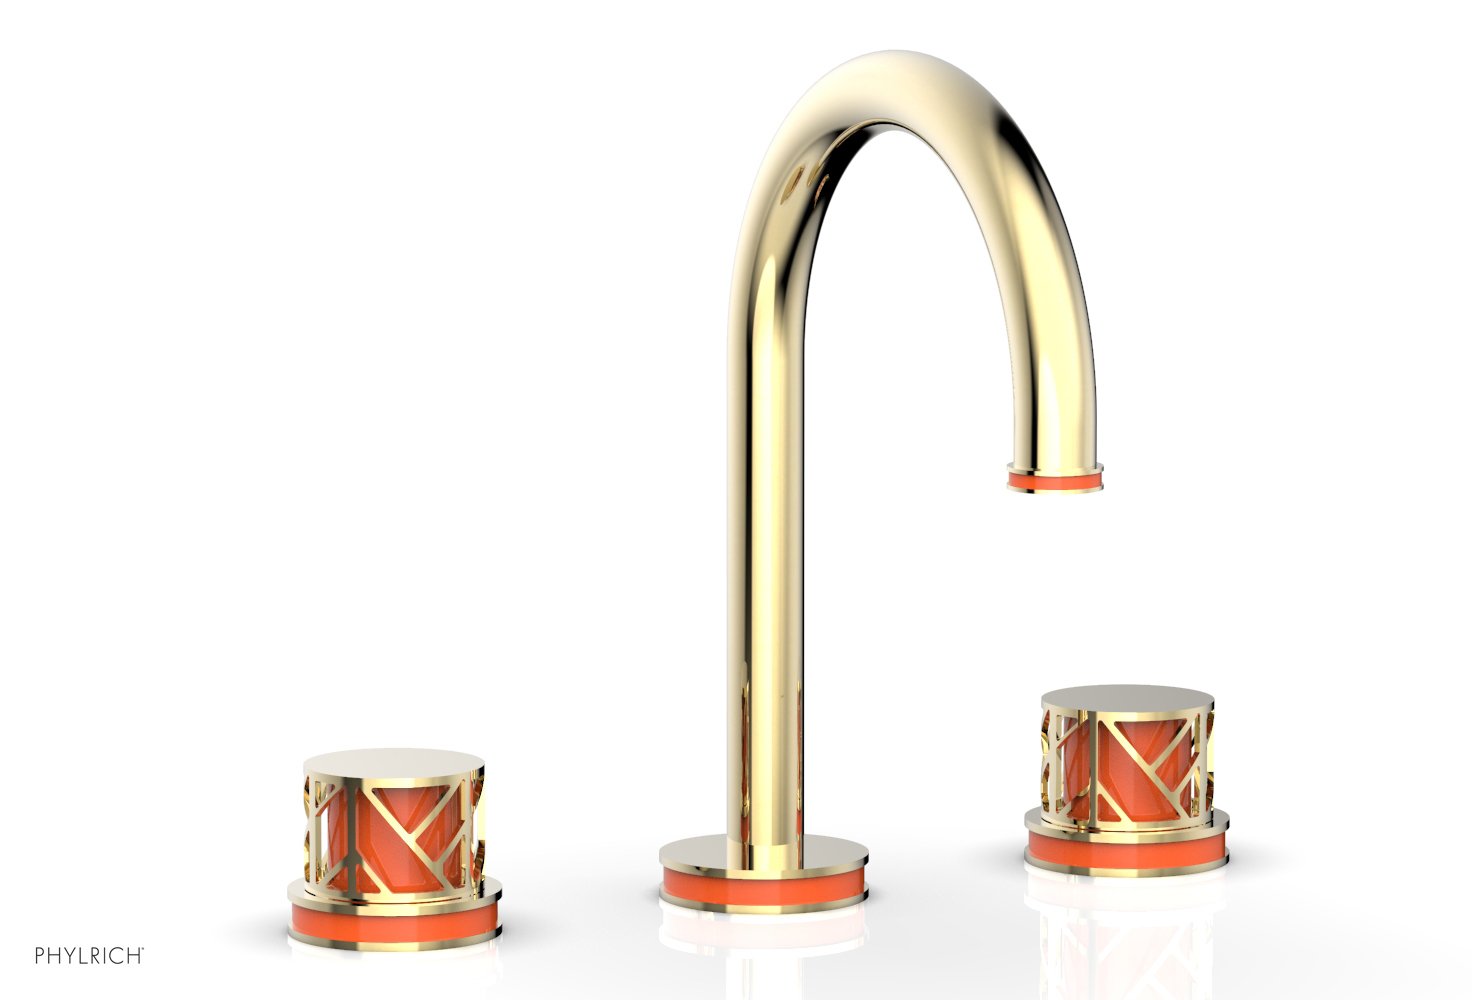 Phylrich JOLIE Widespread Faucet - Round Handles with "Orange" Accents